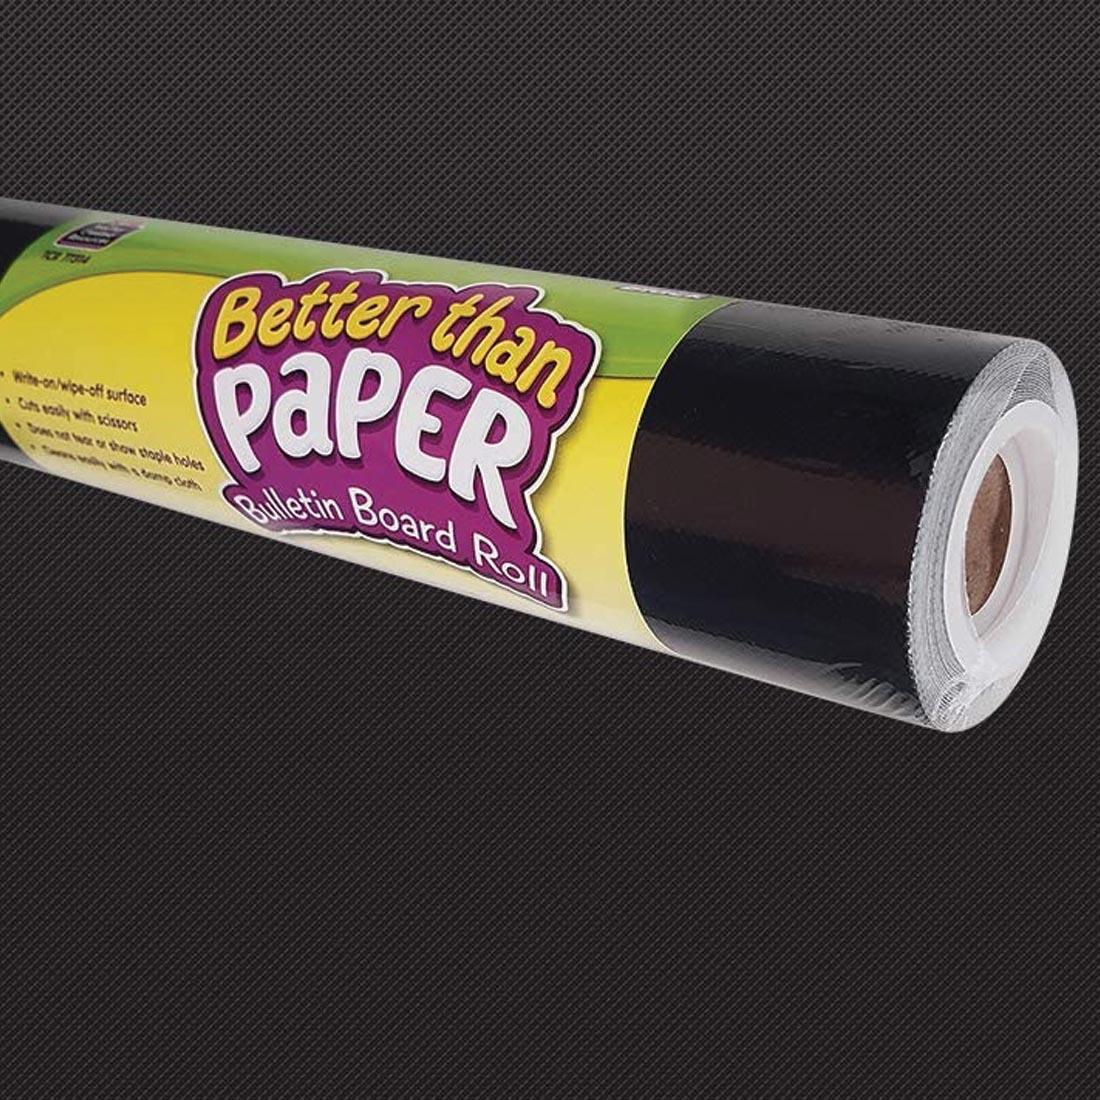 Black Better Than Paper Bulletin Board Roll with it shown in use in the background